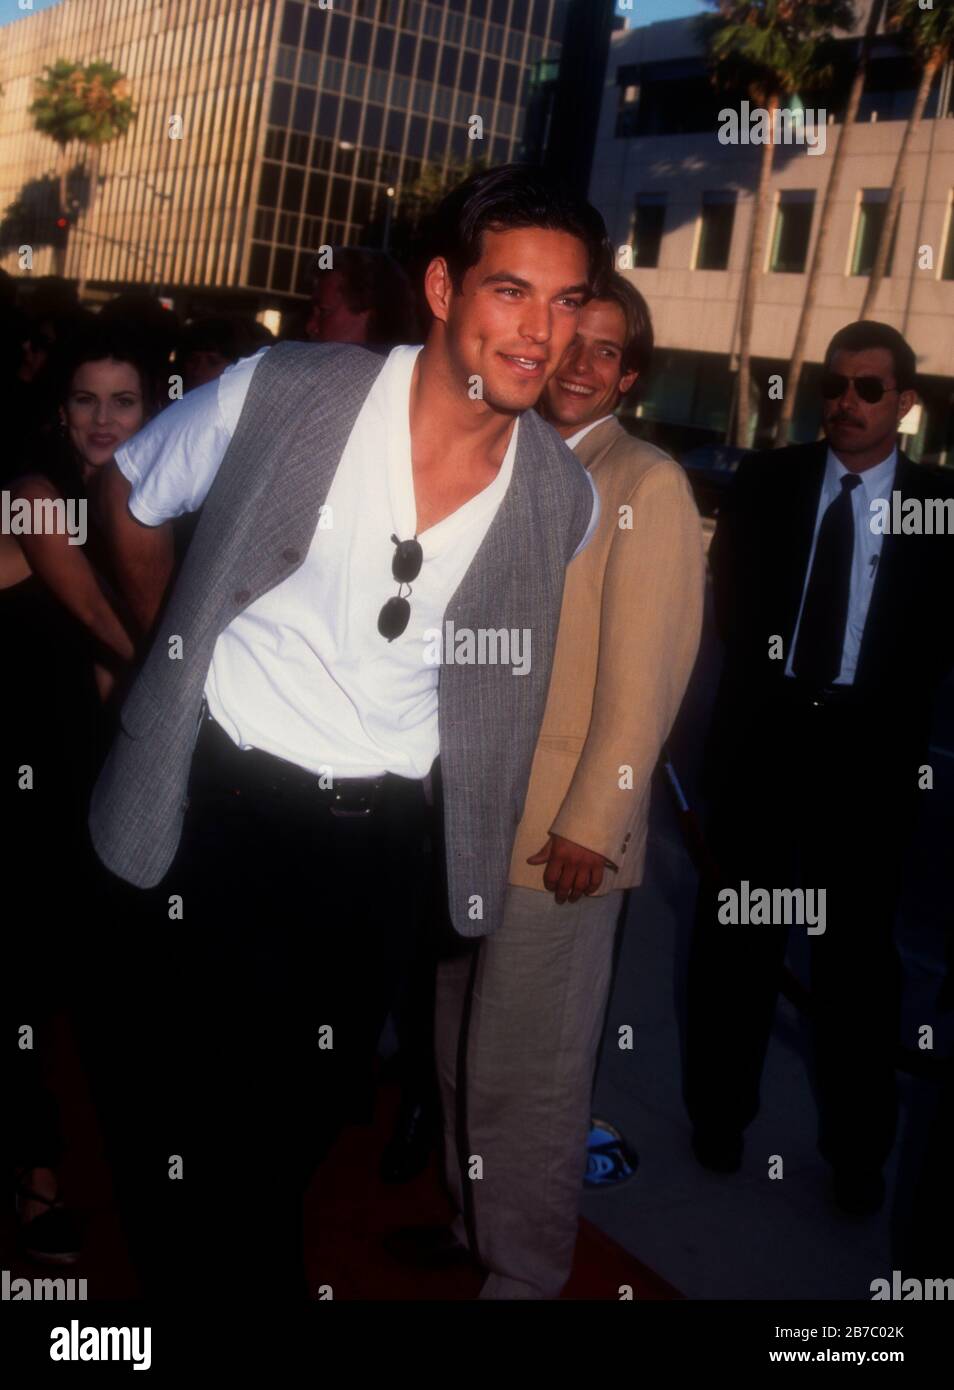 Beverly Hills, California, USA 25th July 1995 Actor Eddie Cibrian attends Columbia Pictures 'The Net' Premierre on July 25, 1995 at the Samuel Goldwyn Theater in Beverly Hills, California, USA. Photo by Barry King/Alamy Stock Photo Stock Photo